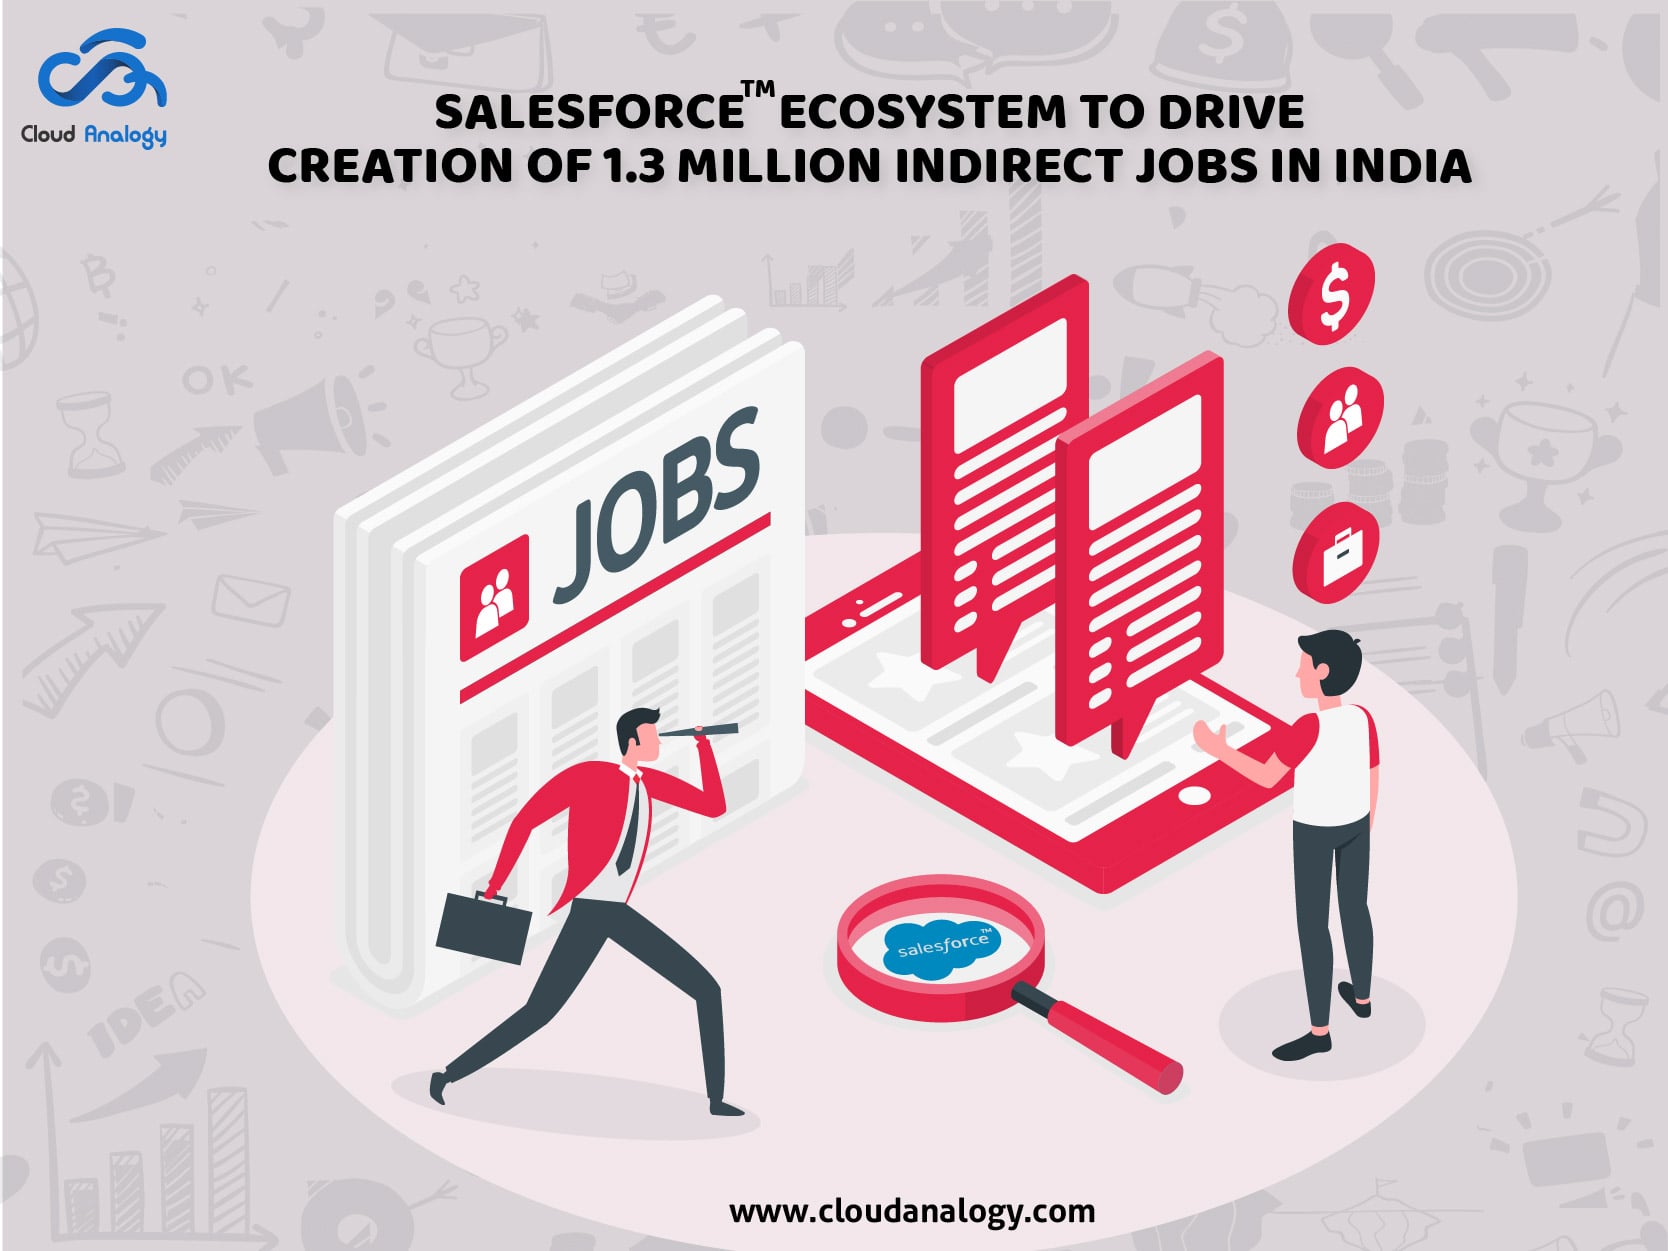 Salesforce Ecosystem To Drive Creation Of 1.3 Million Indirect Jobs In India